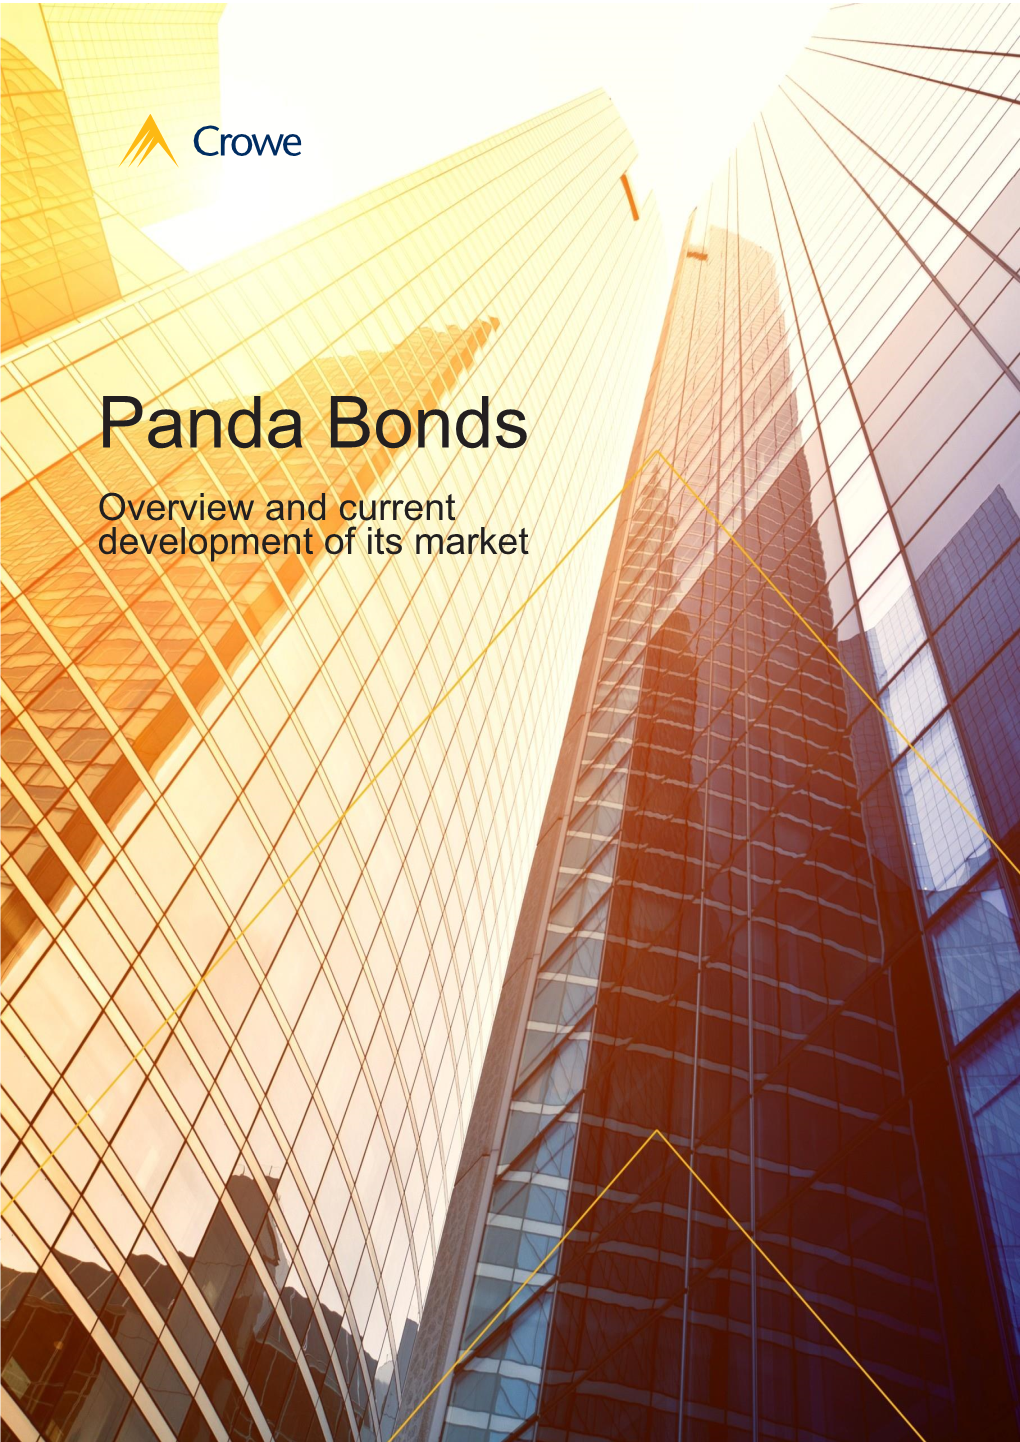 Panda Bonds Overview and Current Development of Its Market